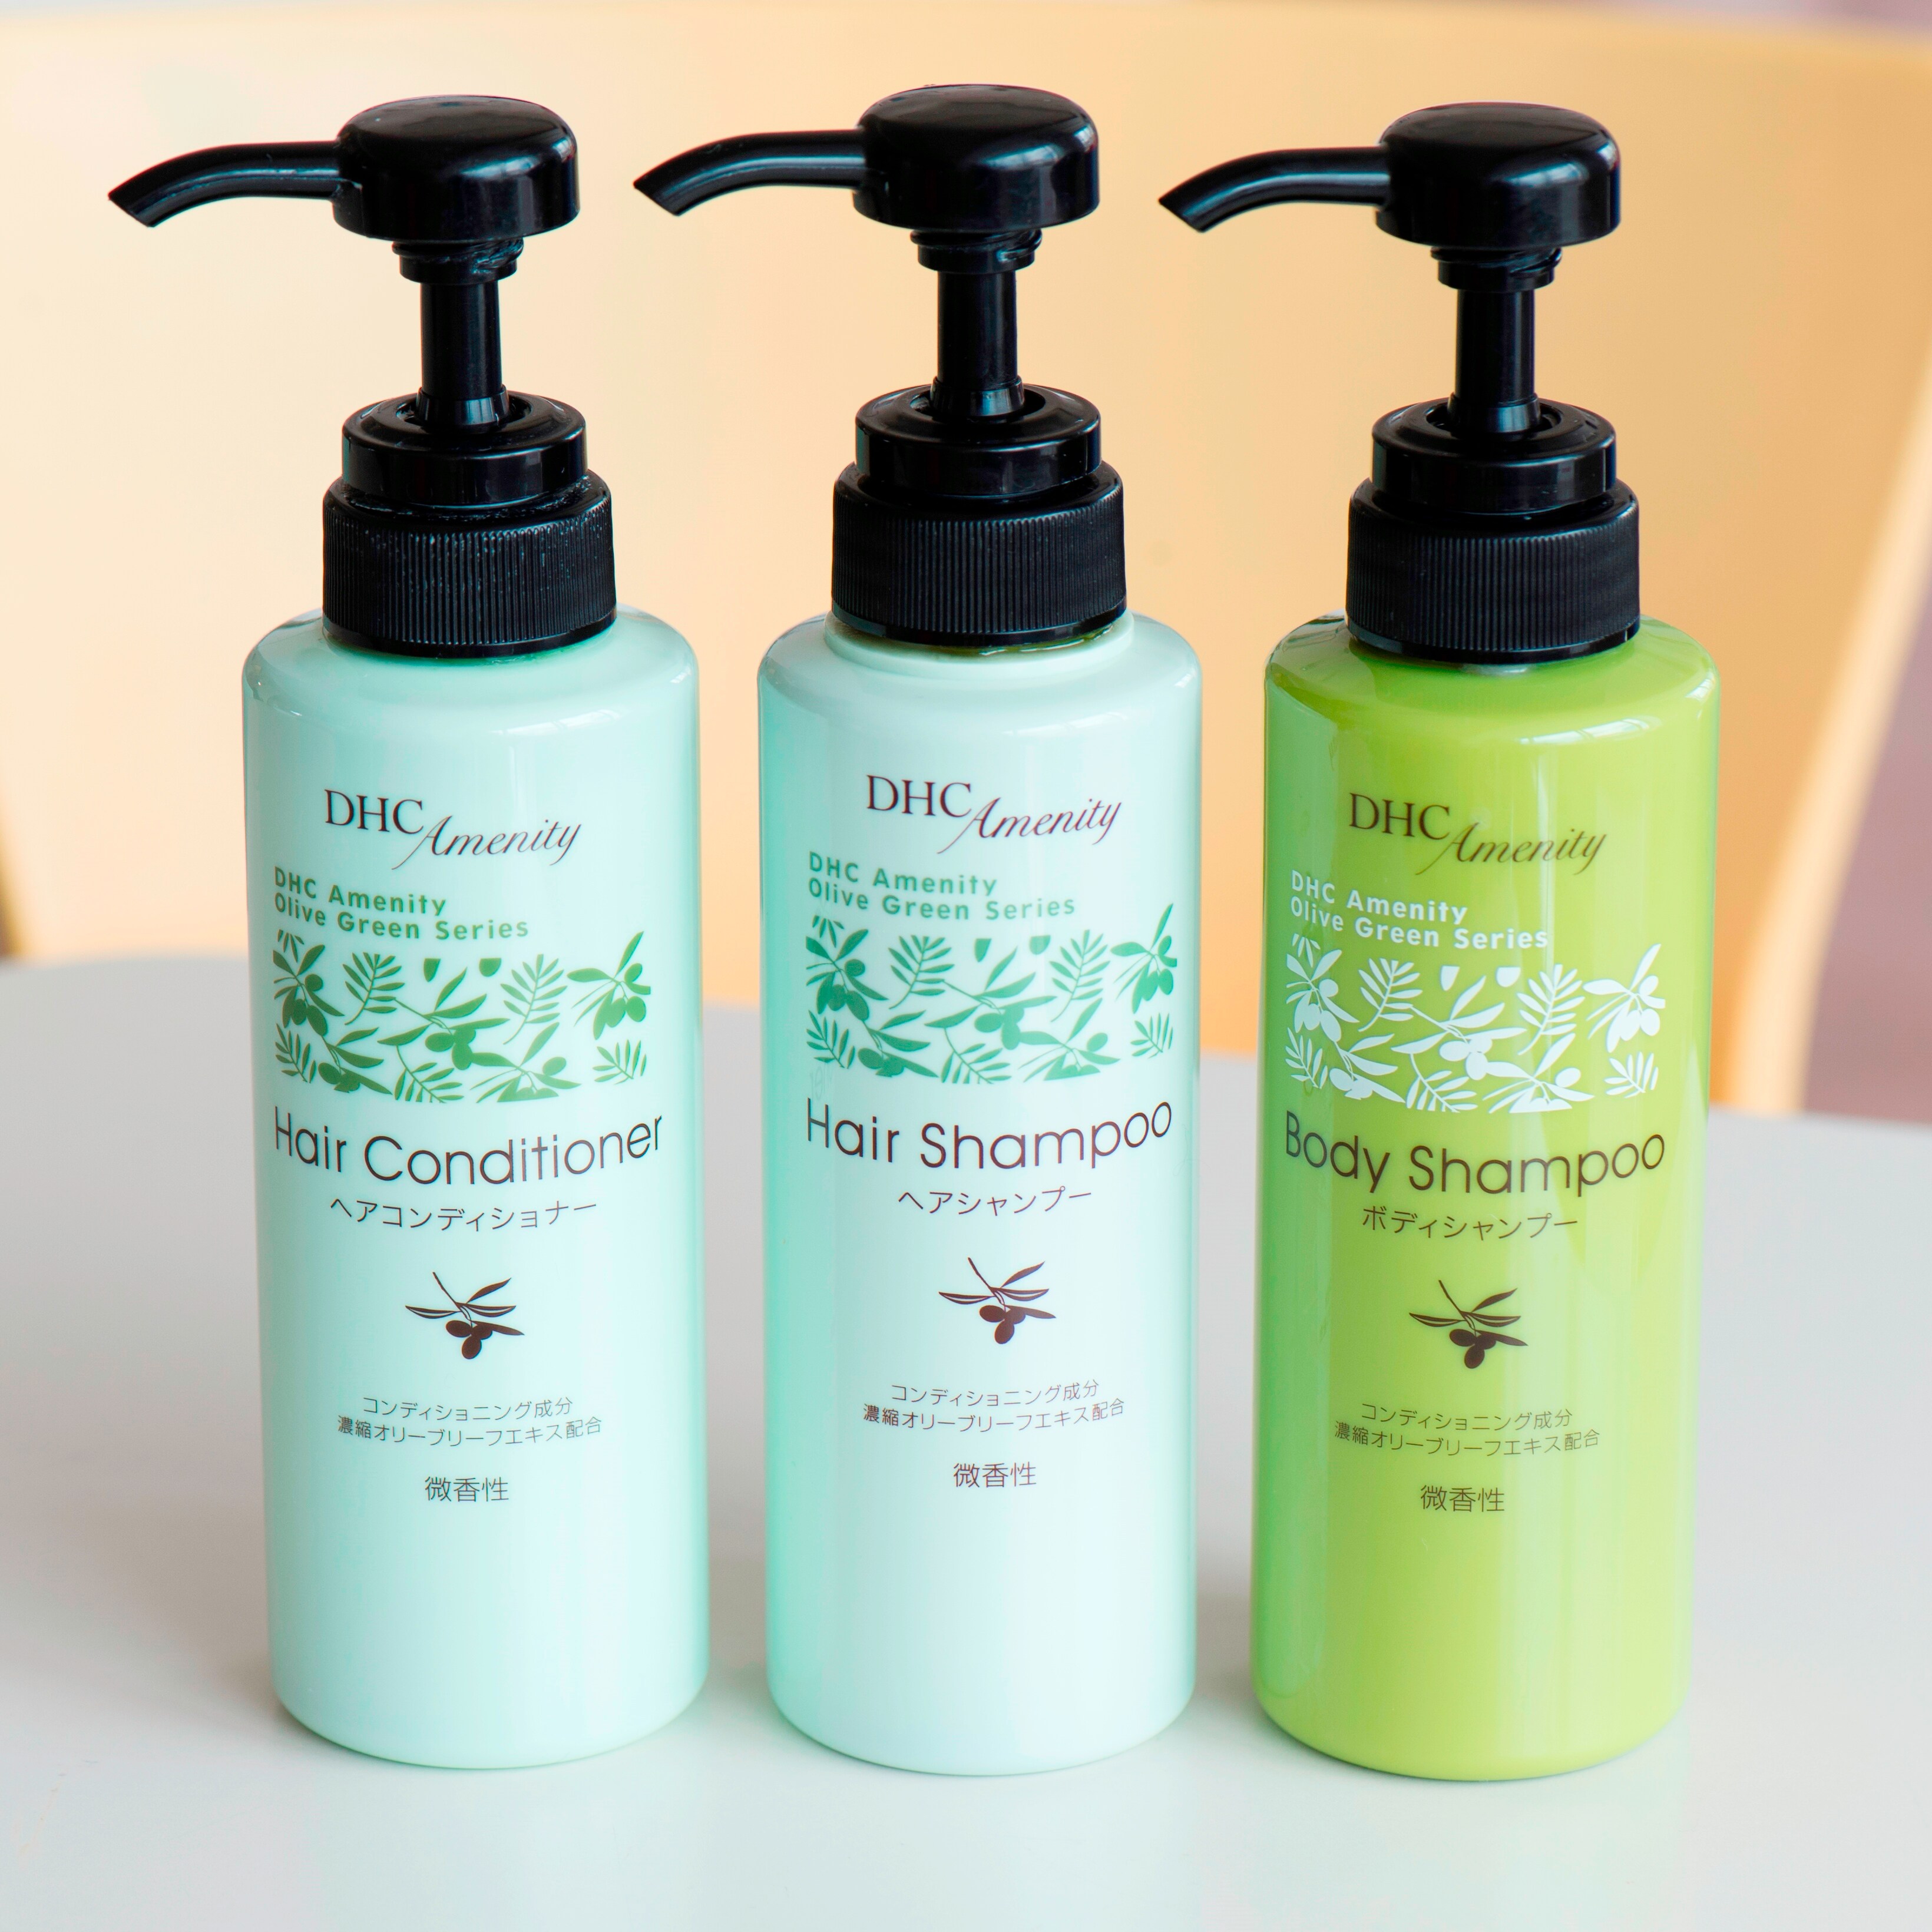  ◆ Shampoo, conditioner, body soap ◆ Popular with women ◎ Made by DHC ♪